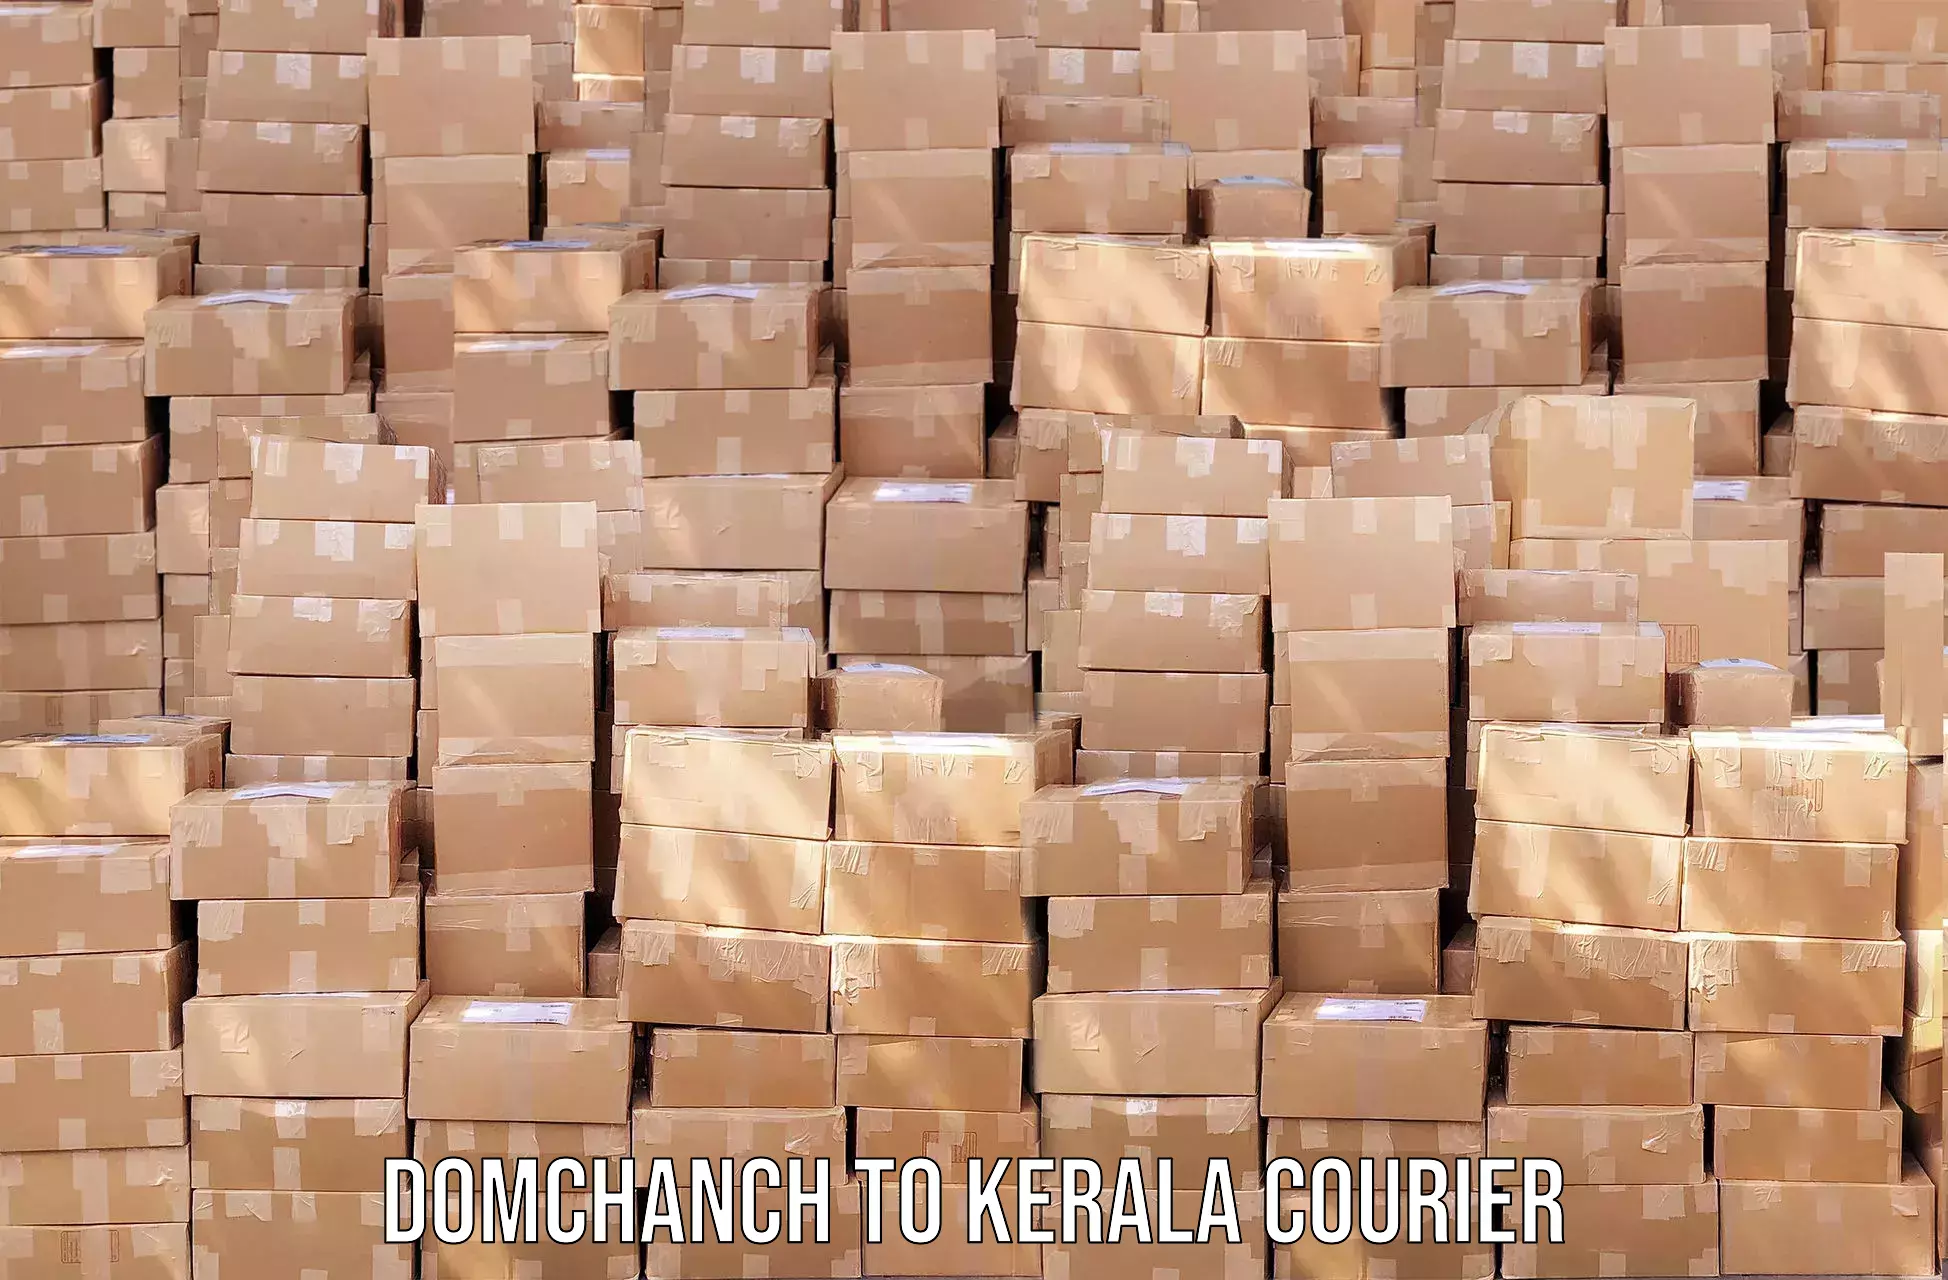 Urban courier service Domchanch to Kerala